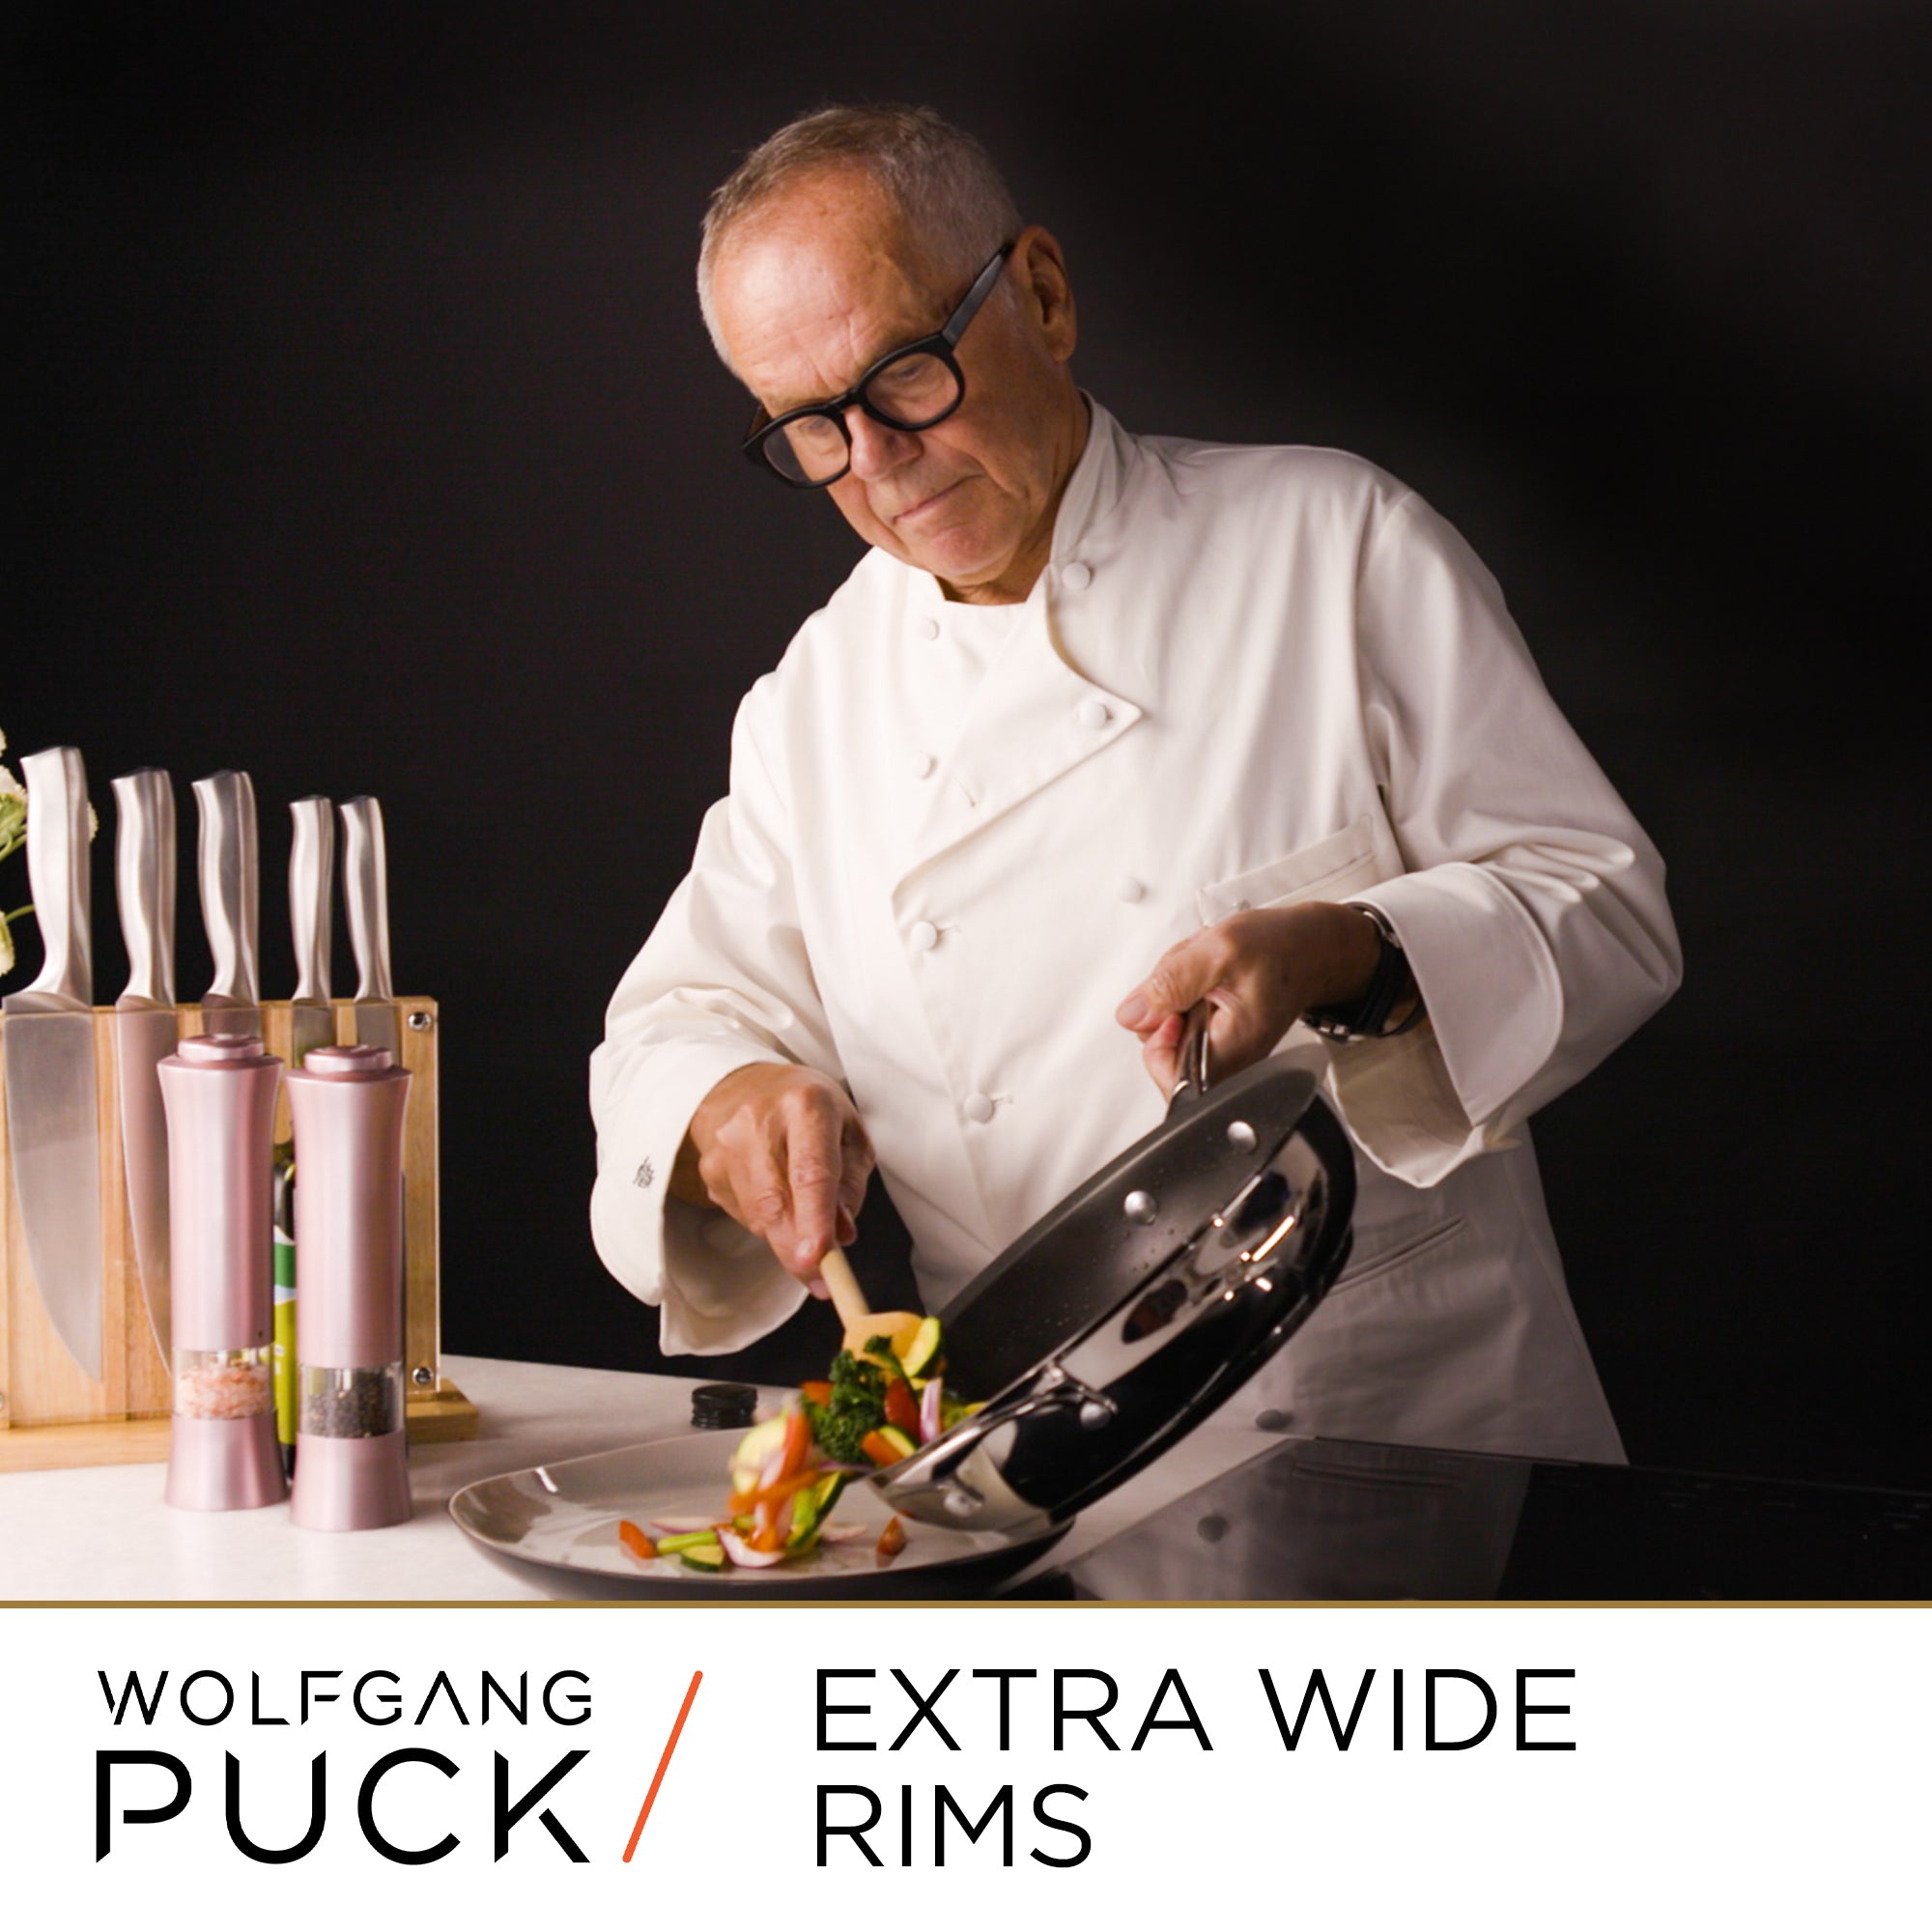 extra wide rim skillet set from Wolfgang Puck